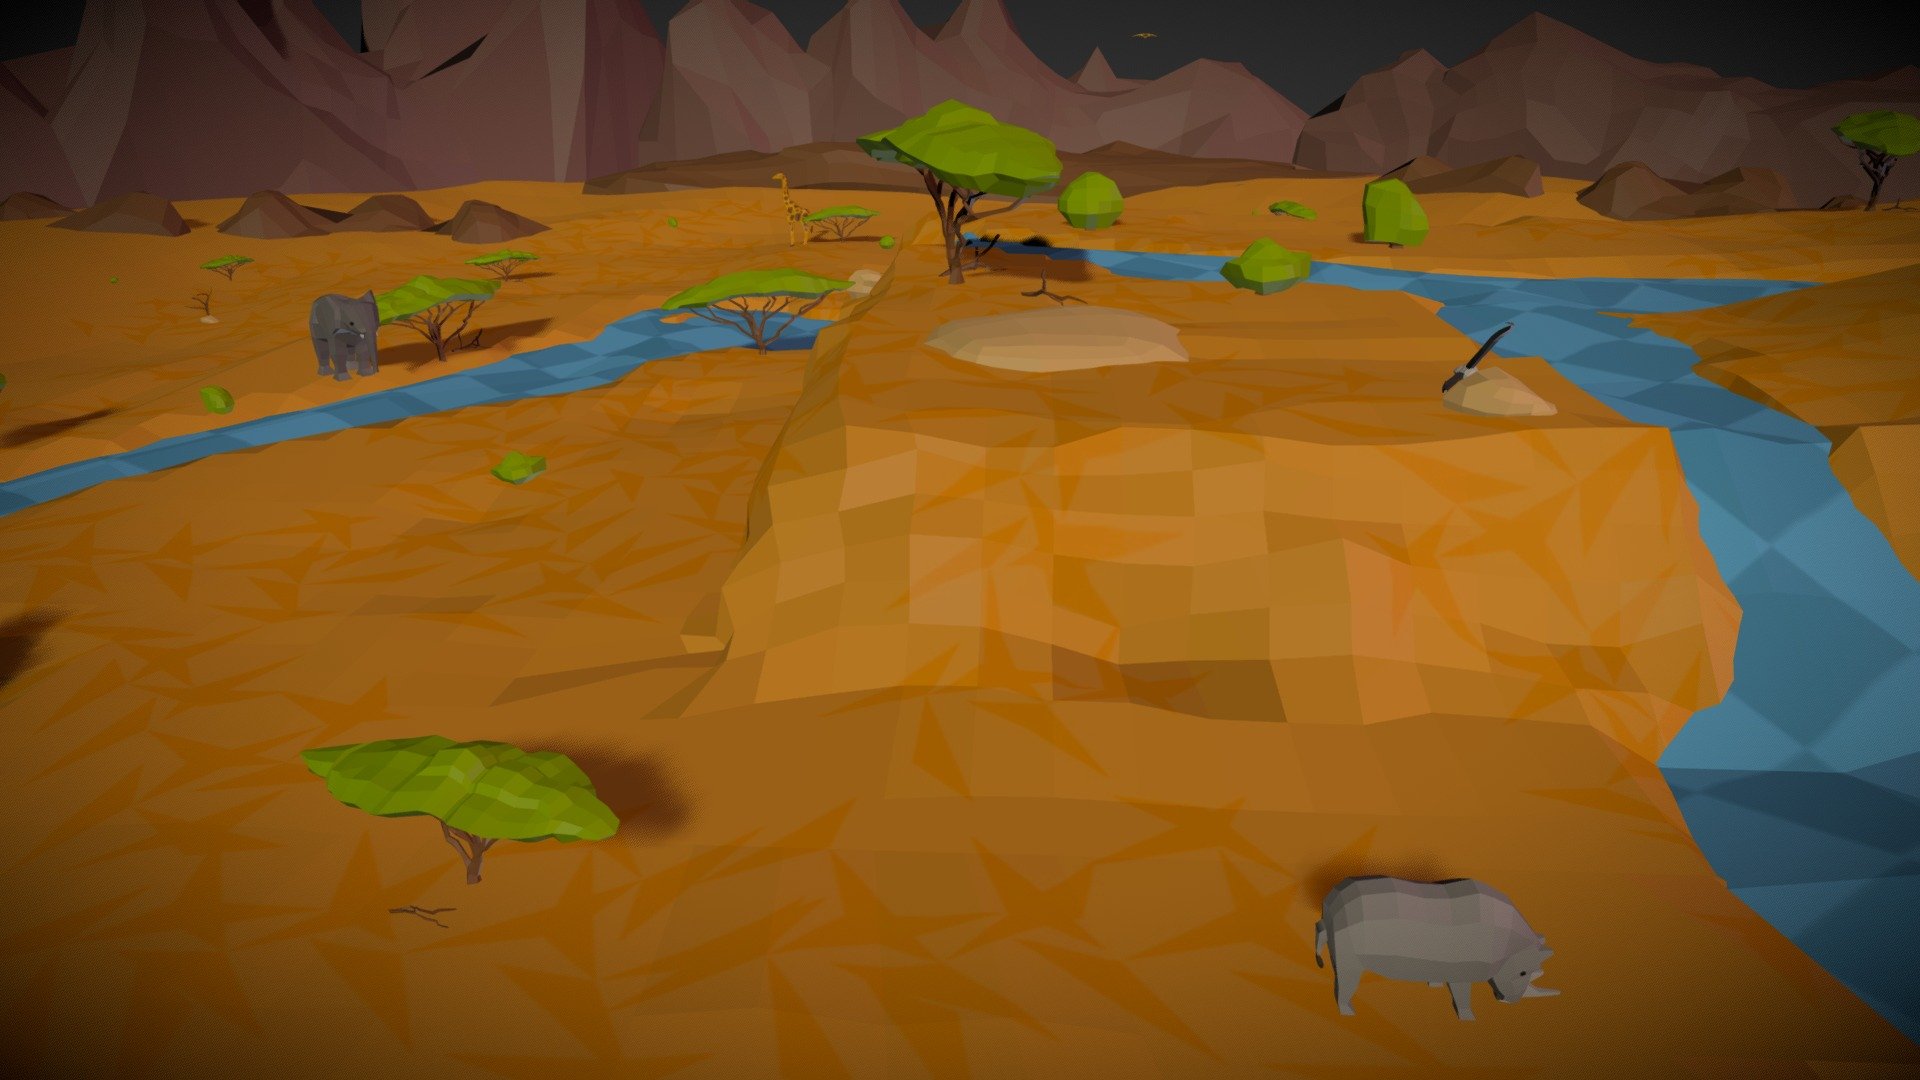 We(iCUBE) are making a VR arcade game, which will tie into traffic safety. We decided to have certain games be playable, and the player would go up to that game and enter the game portal, like Tron. This is the scene for the Lion attack game, its featured in a low poly African savanna. This was really fun to create because we were told that we could go wild in designing these scenes as long as the client could be given updates periodically. They approved of my design, it was such fun to create 3d model